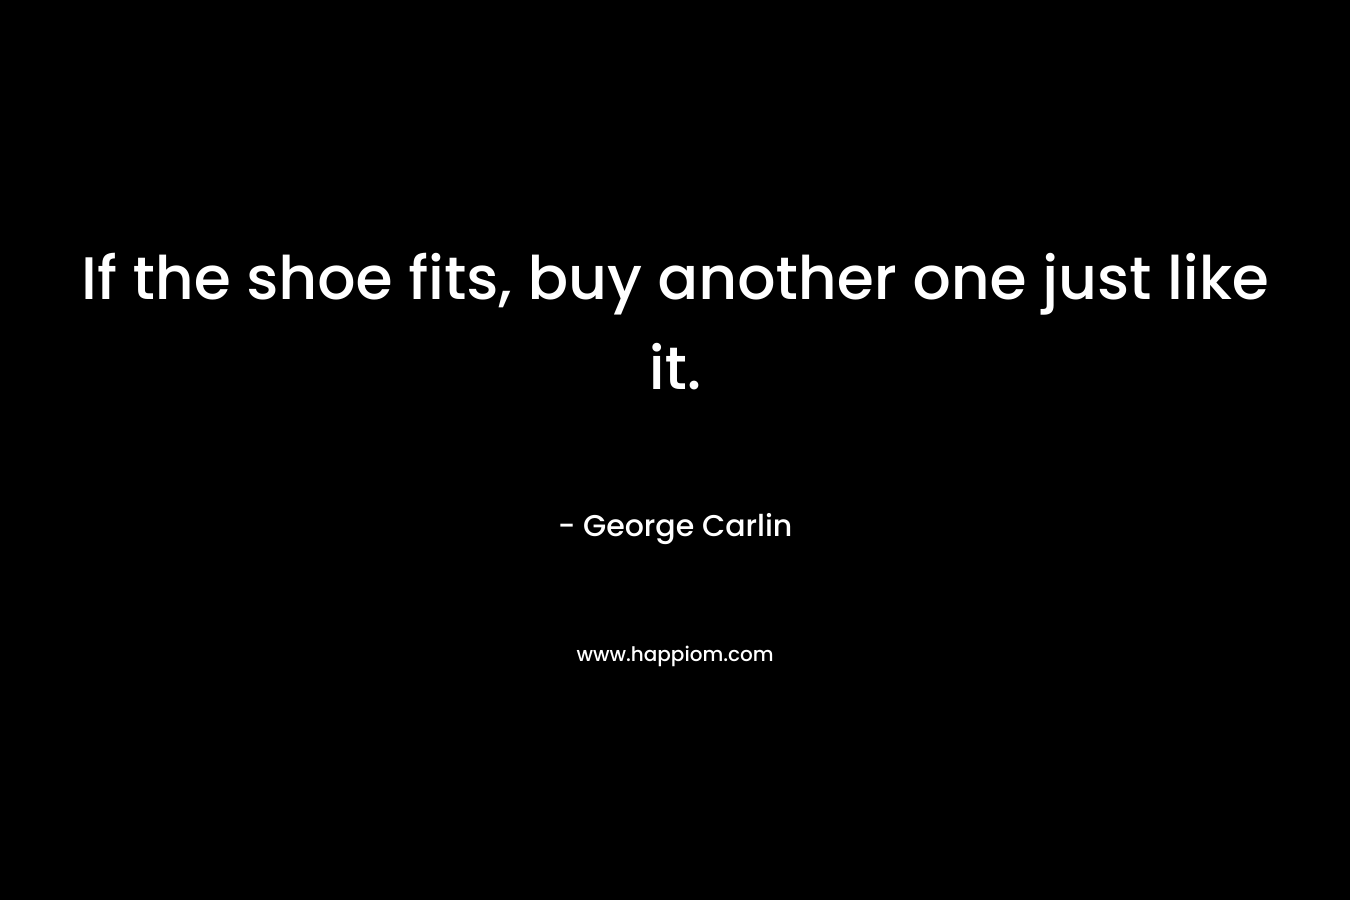 If the shoe fits, buy another one just like it. – George Carlin